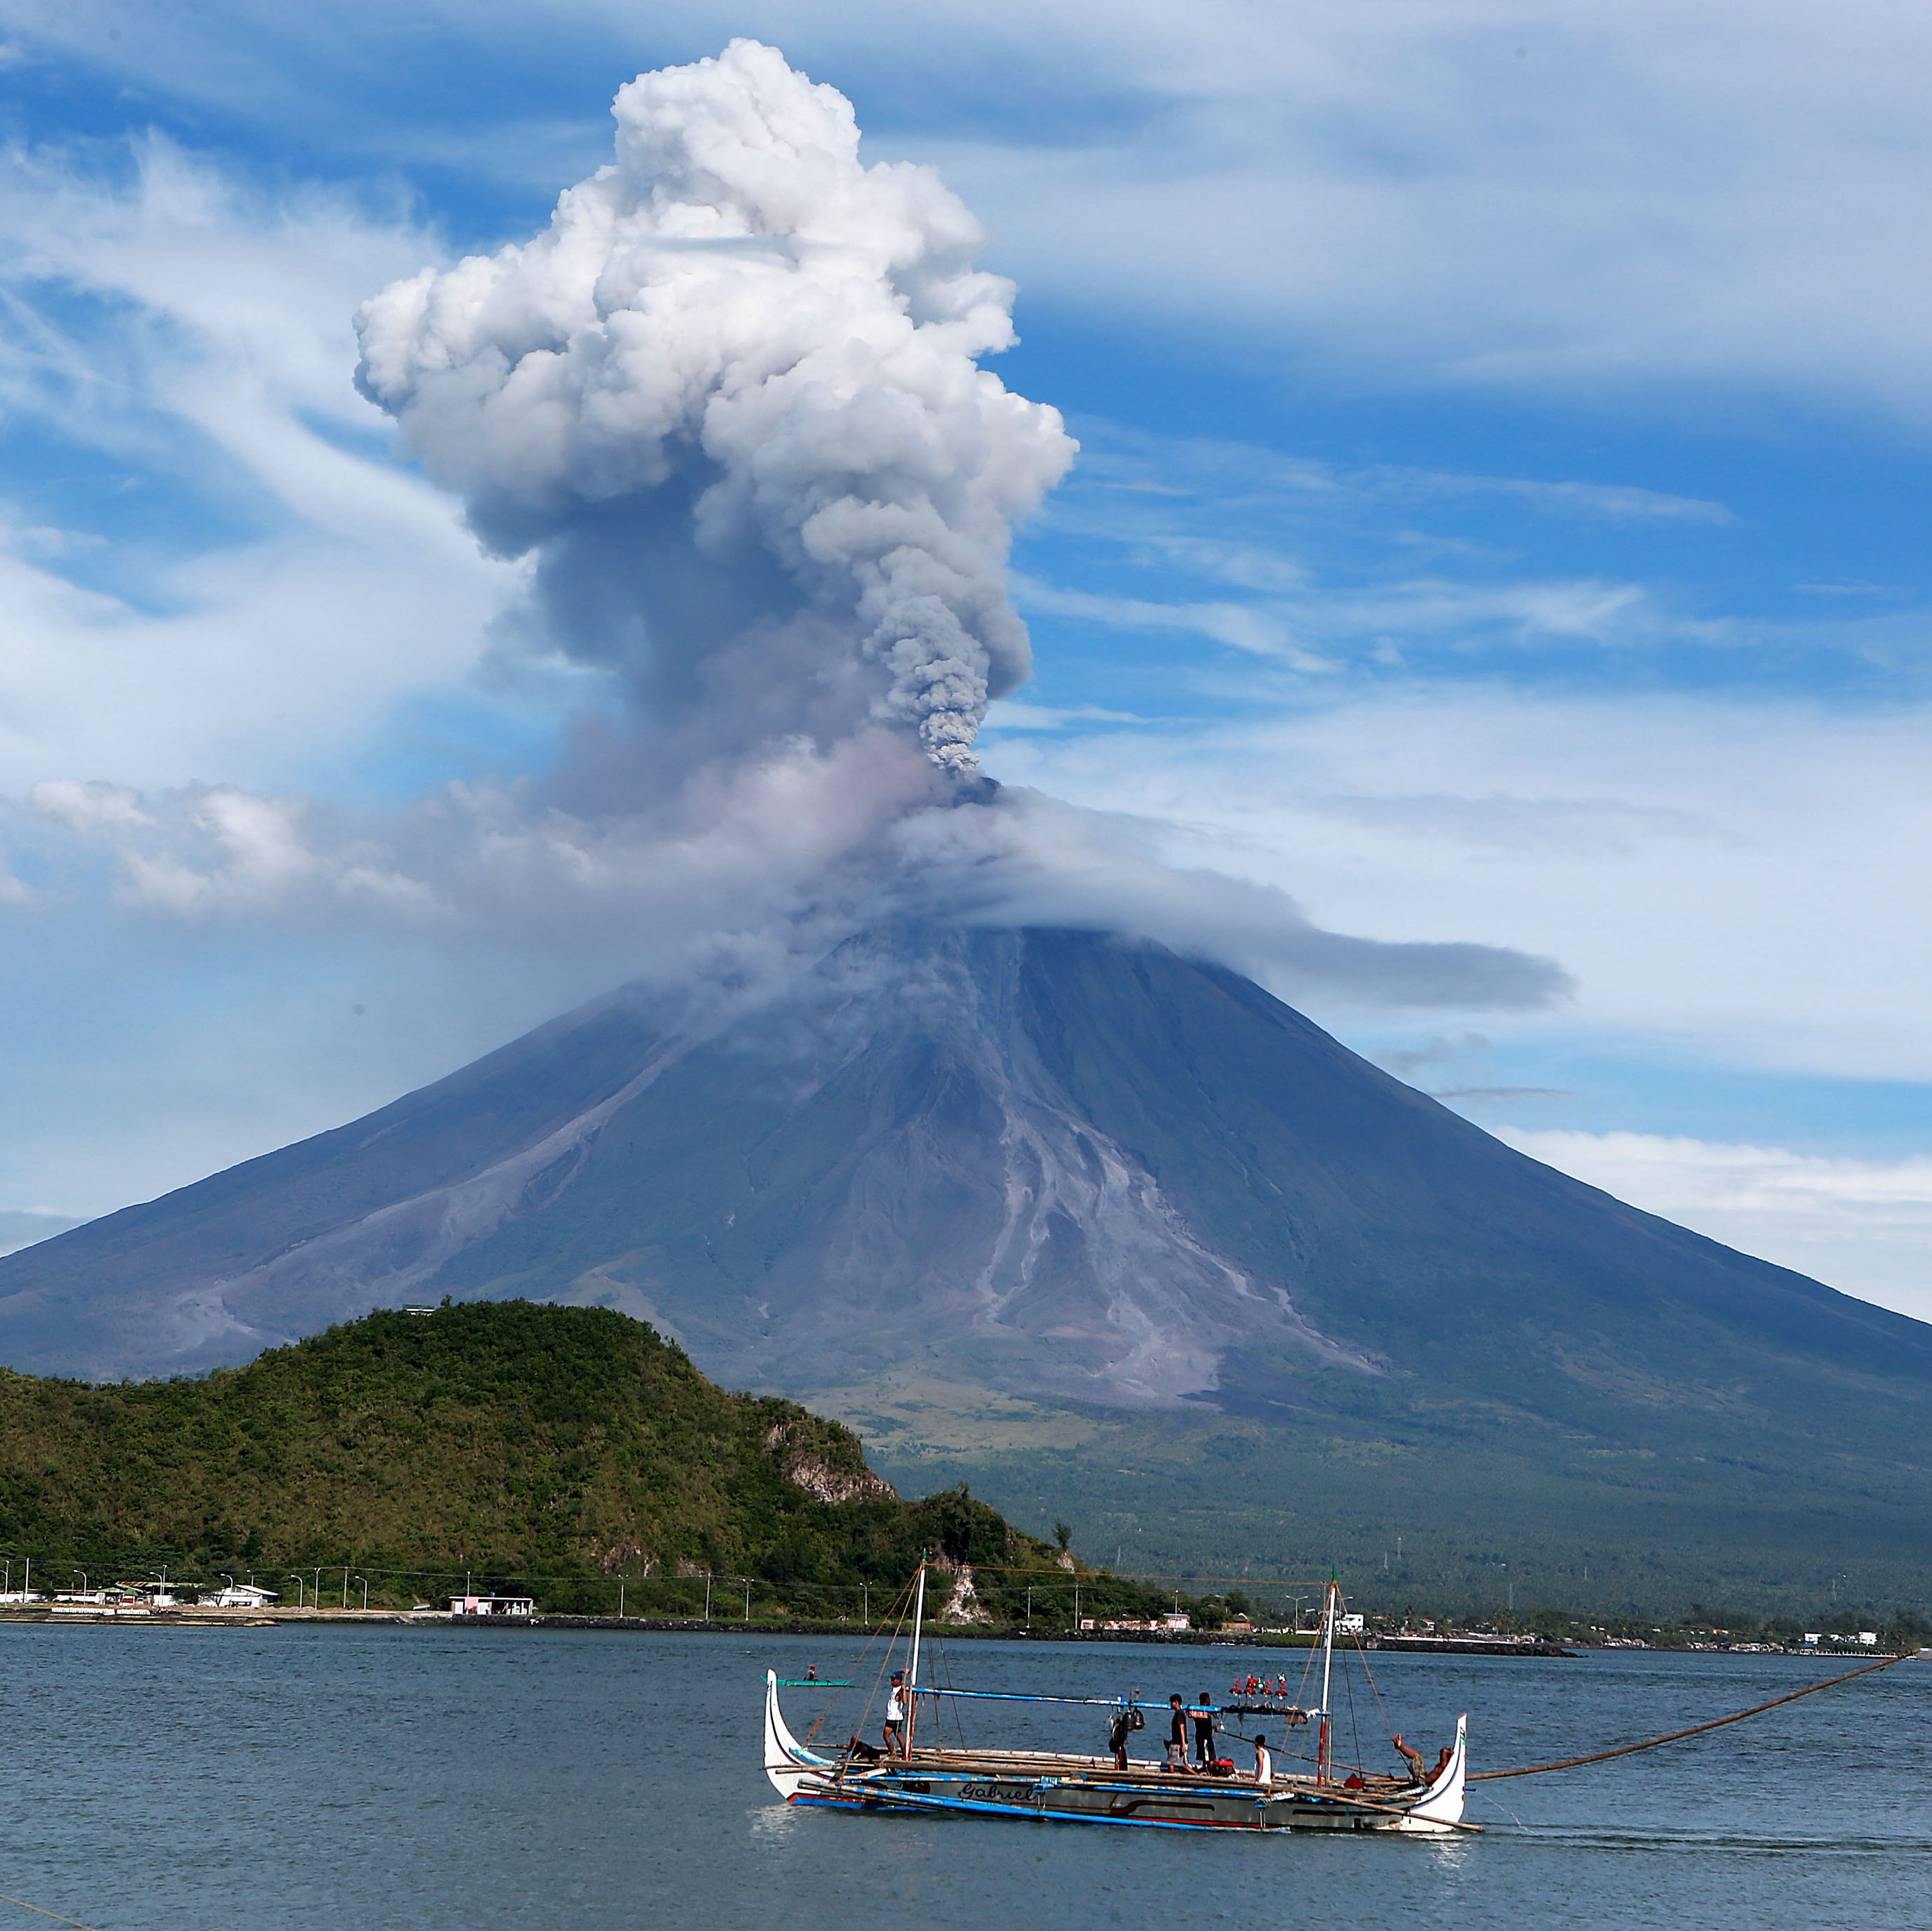 The 15 Most Dangerous Active Volcanoes (That Are Closest to Highly Populated Areas) in the World